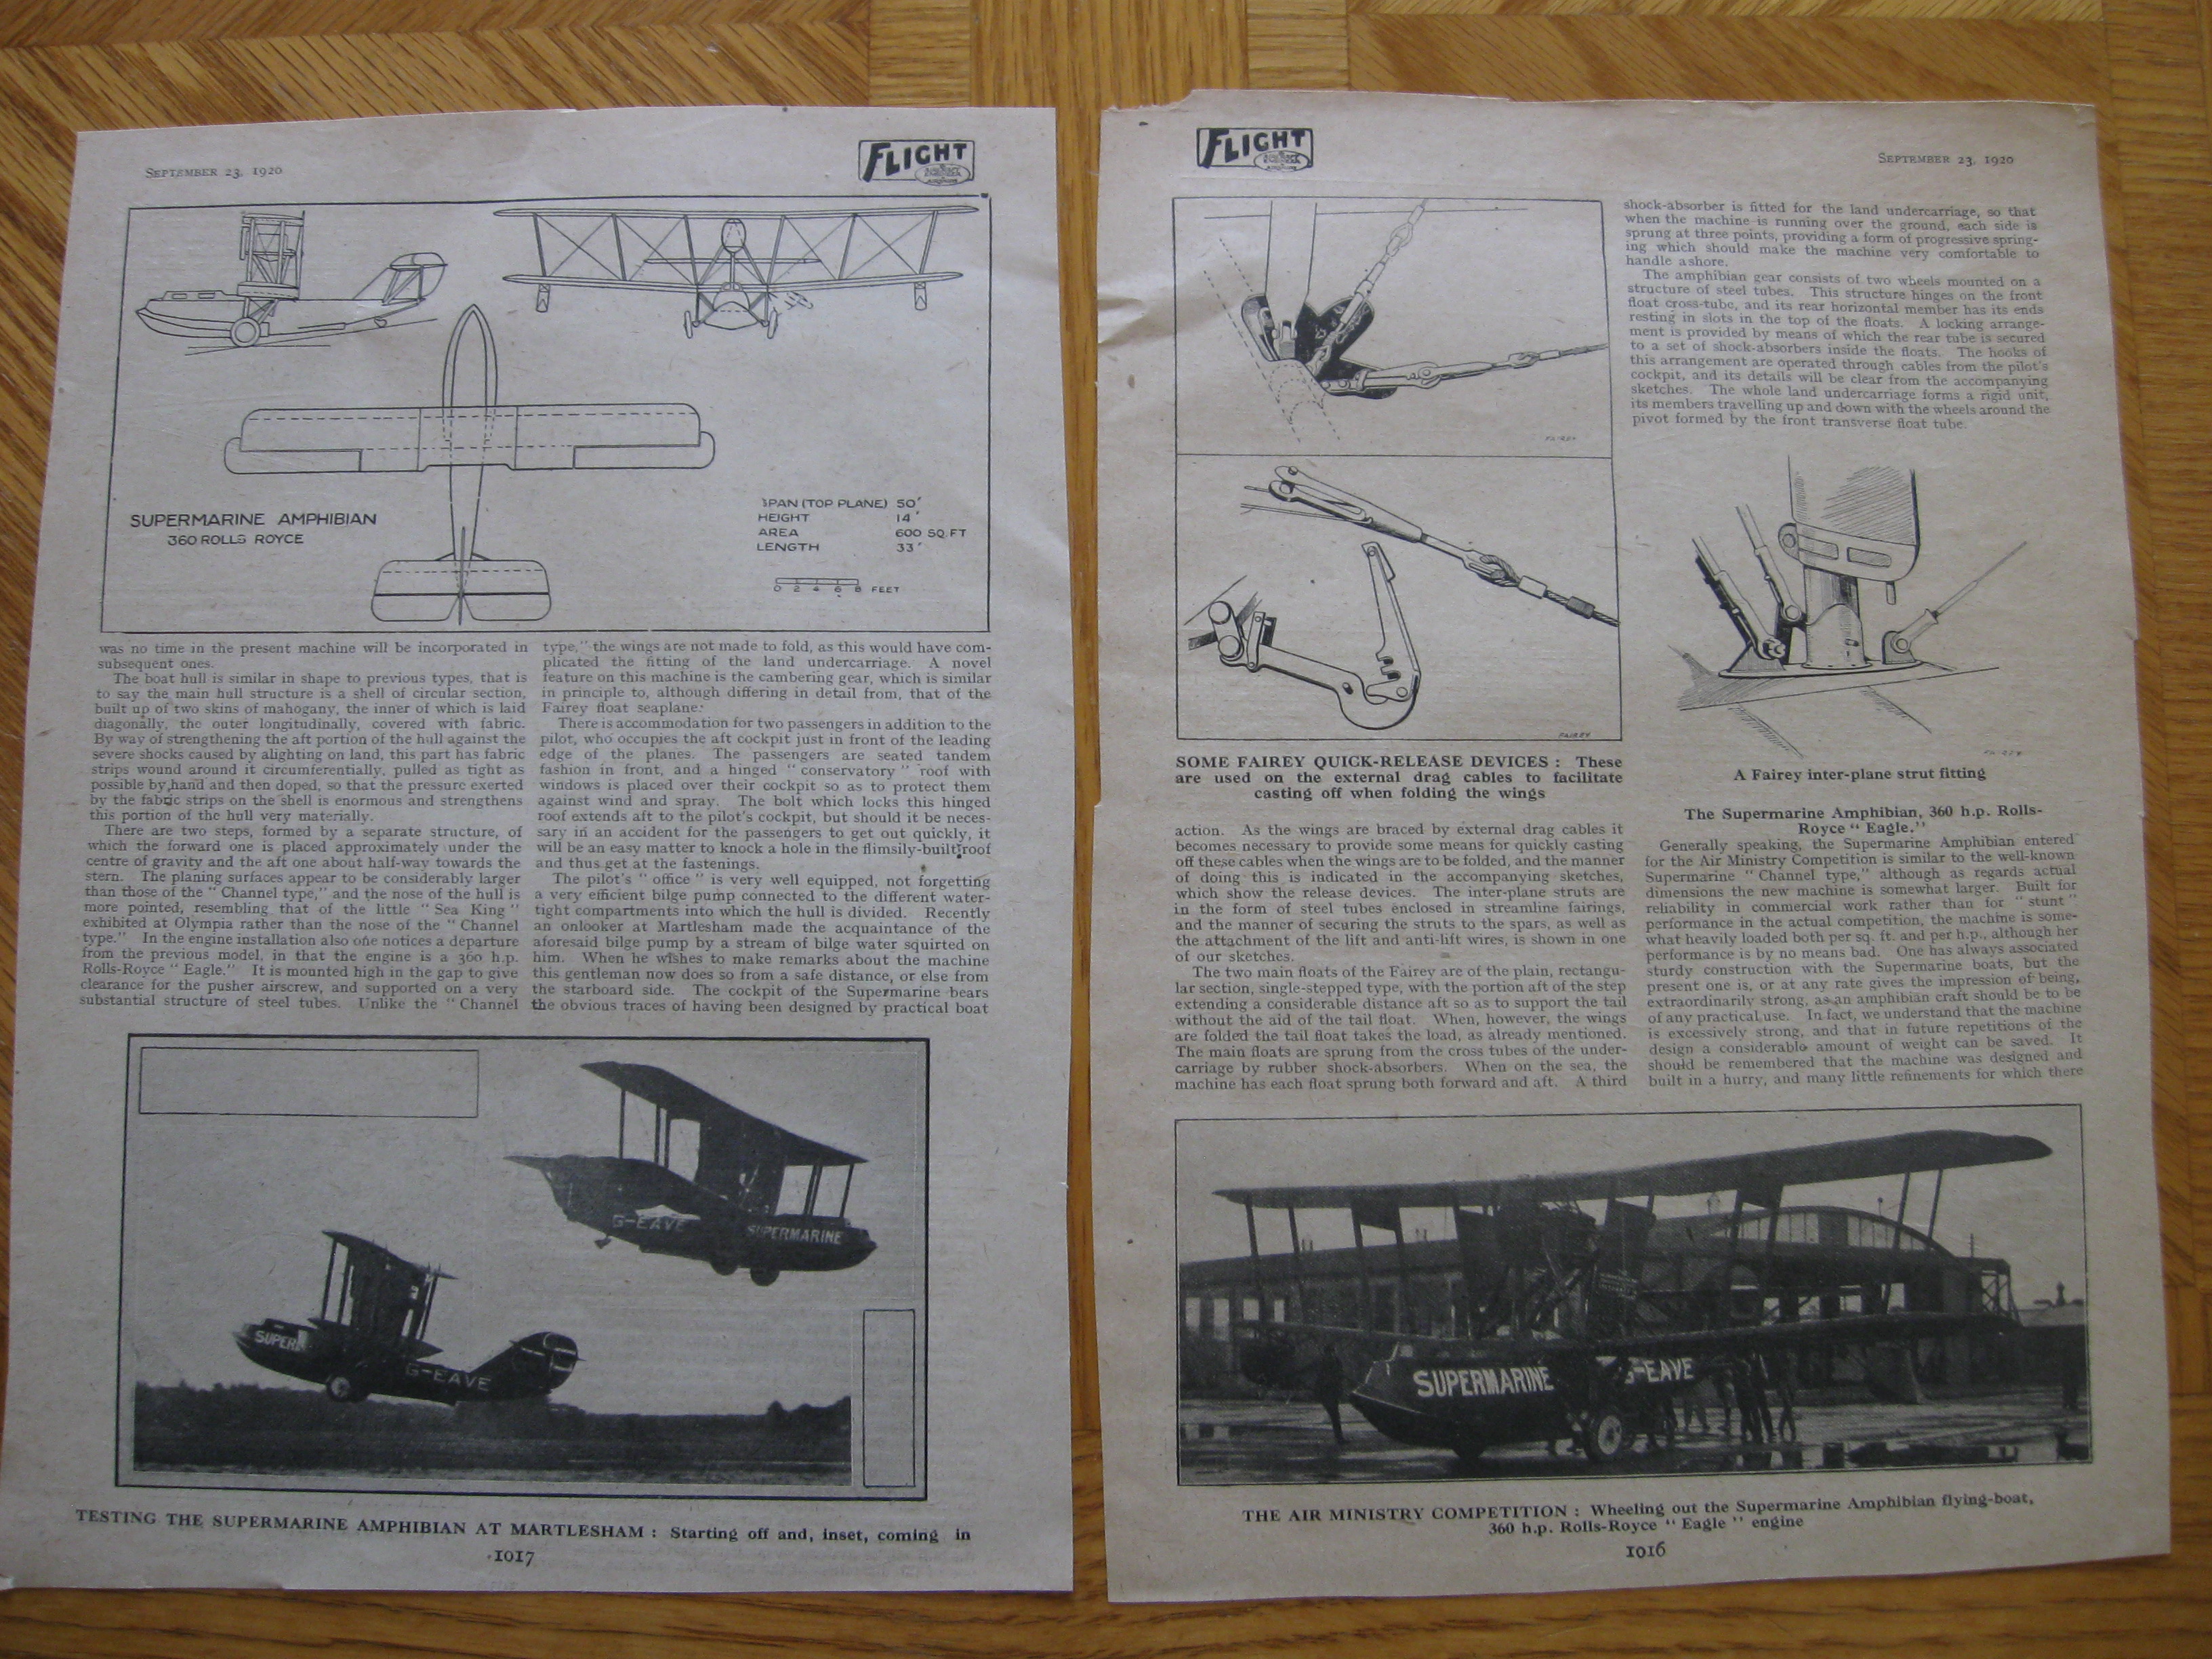 Supermarine Article from a 1920 Flight magazine